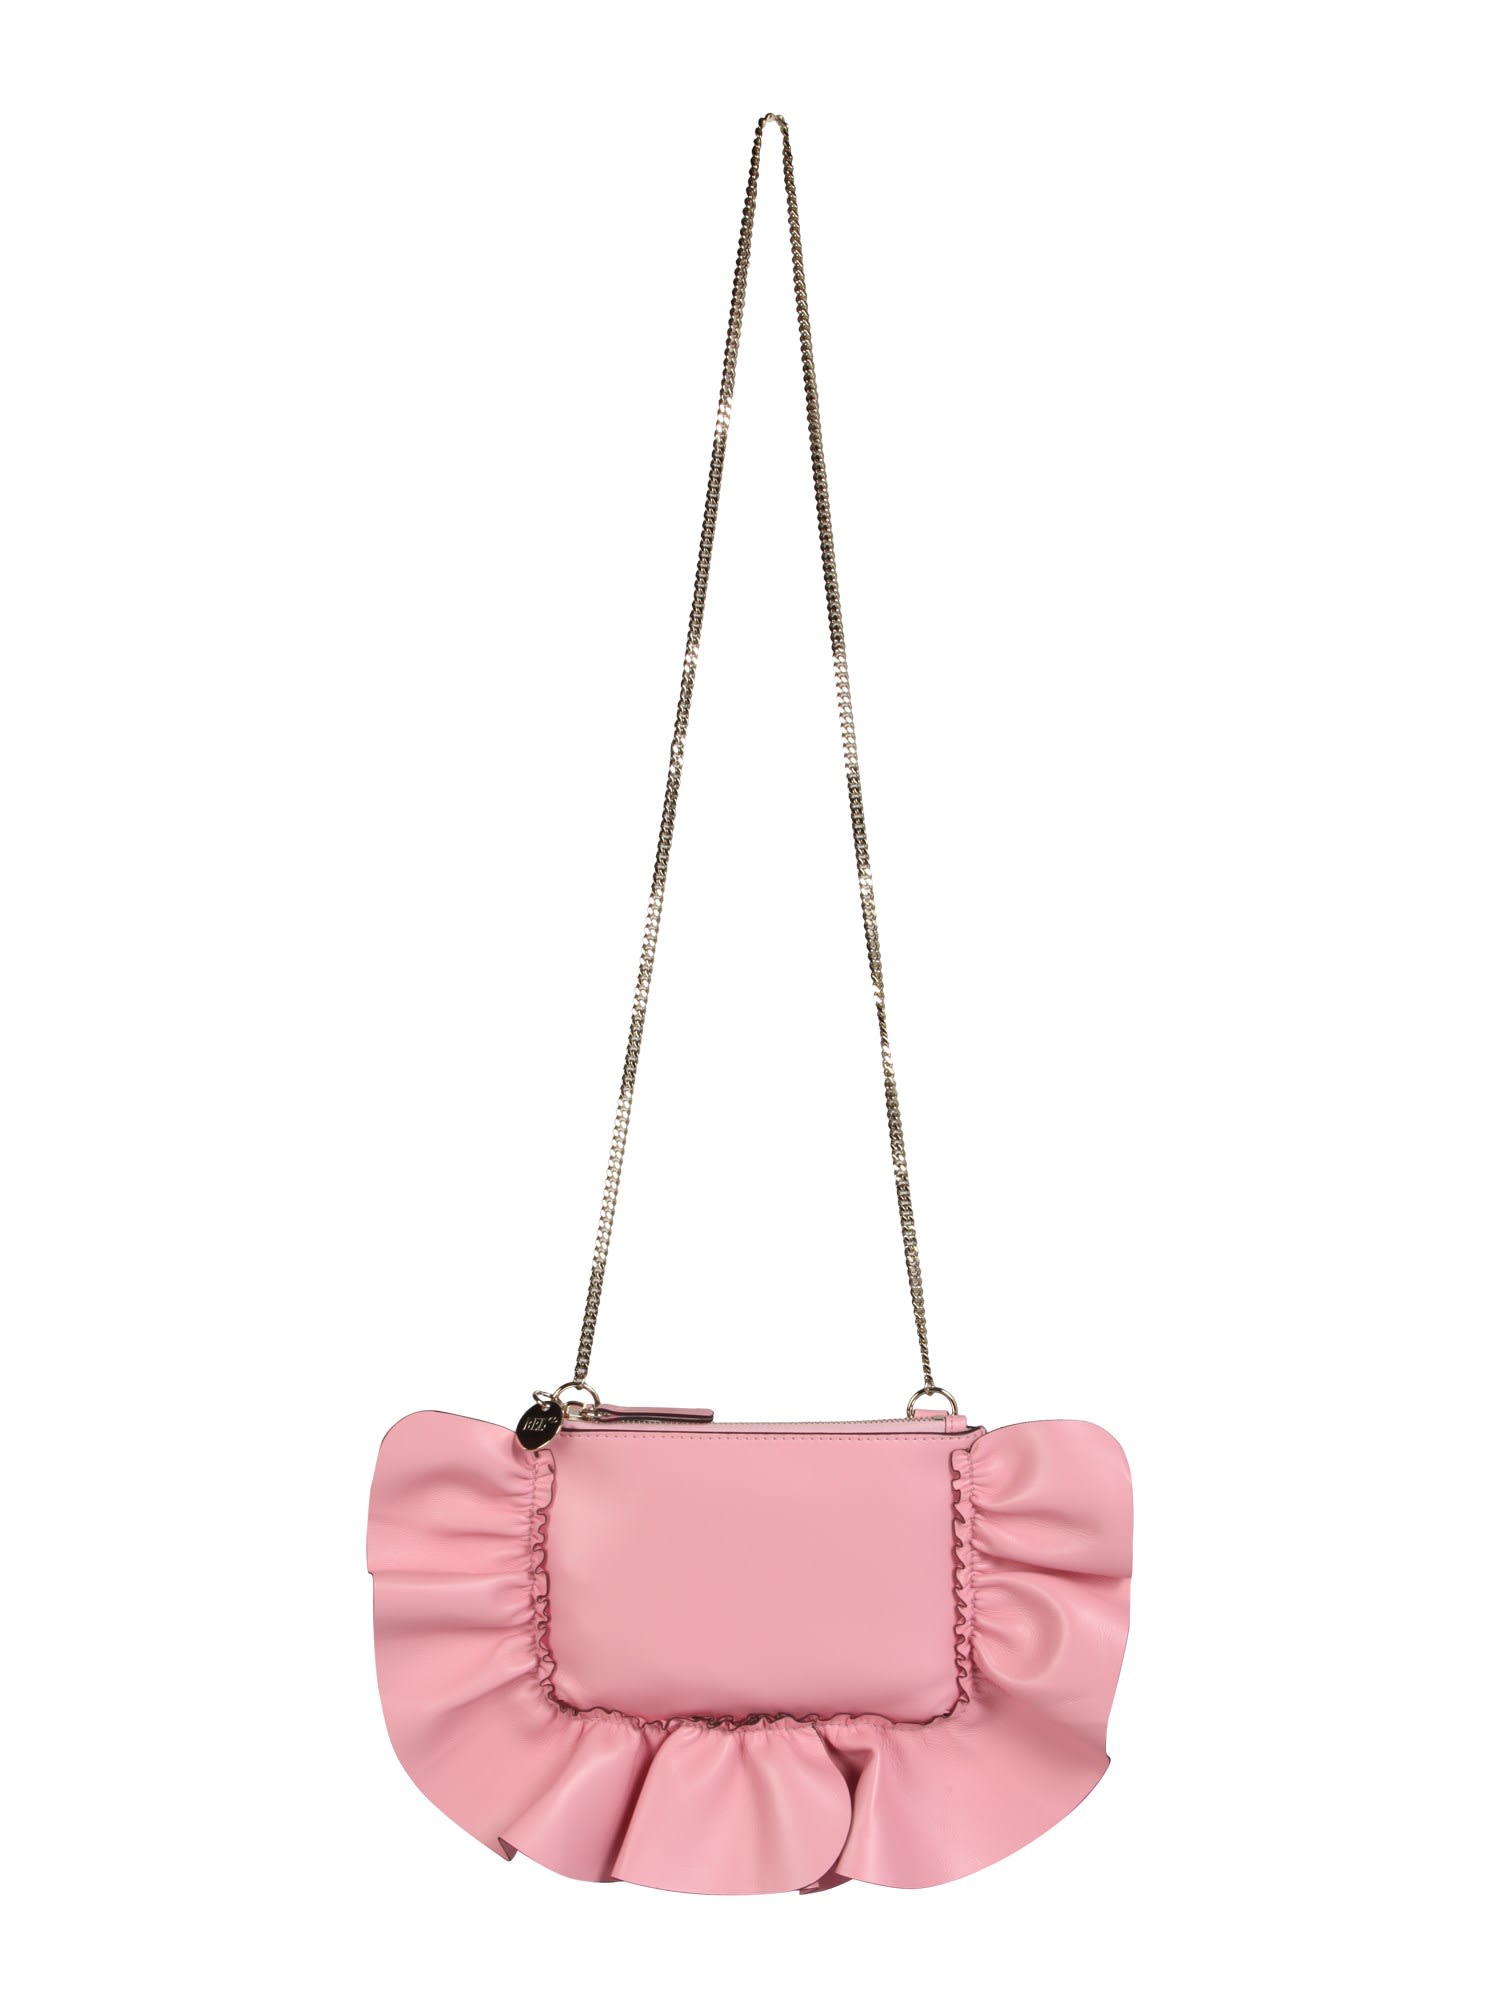 Red Valentino Leathers ROCK CLUTCH WITH RUFFLES